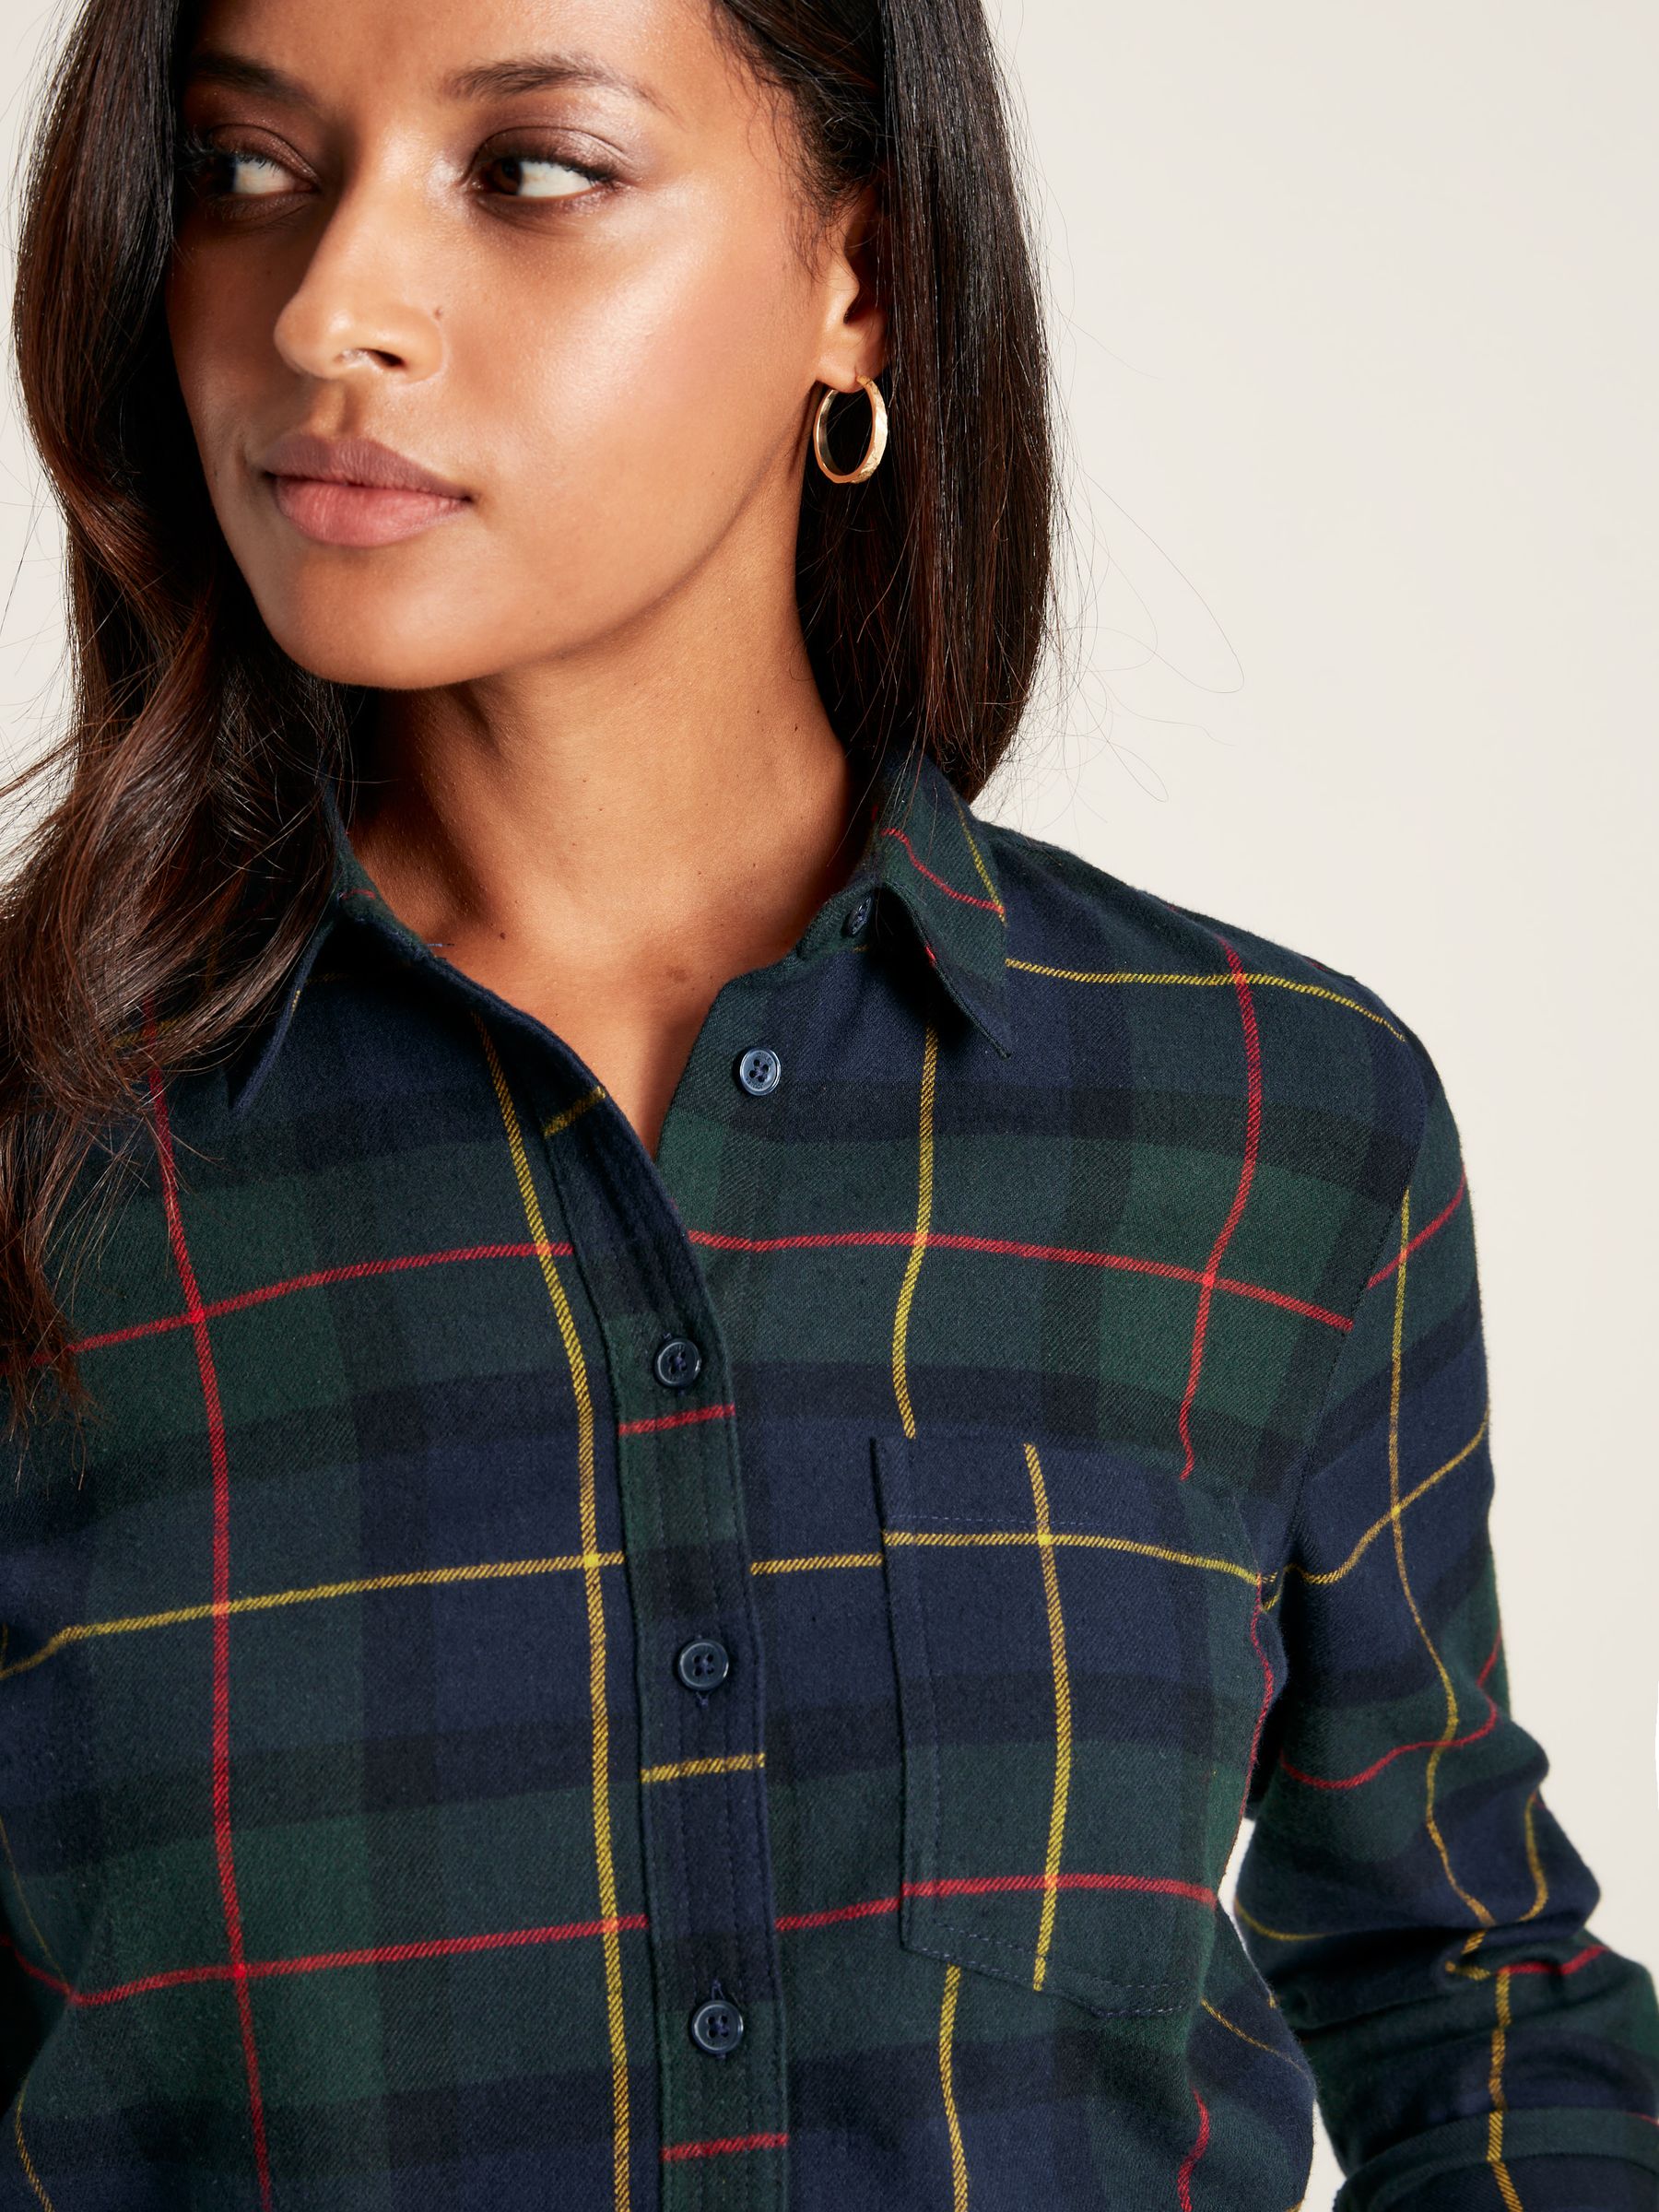 Buy Lorena Brushed Shirt from the Joules online shop